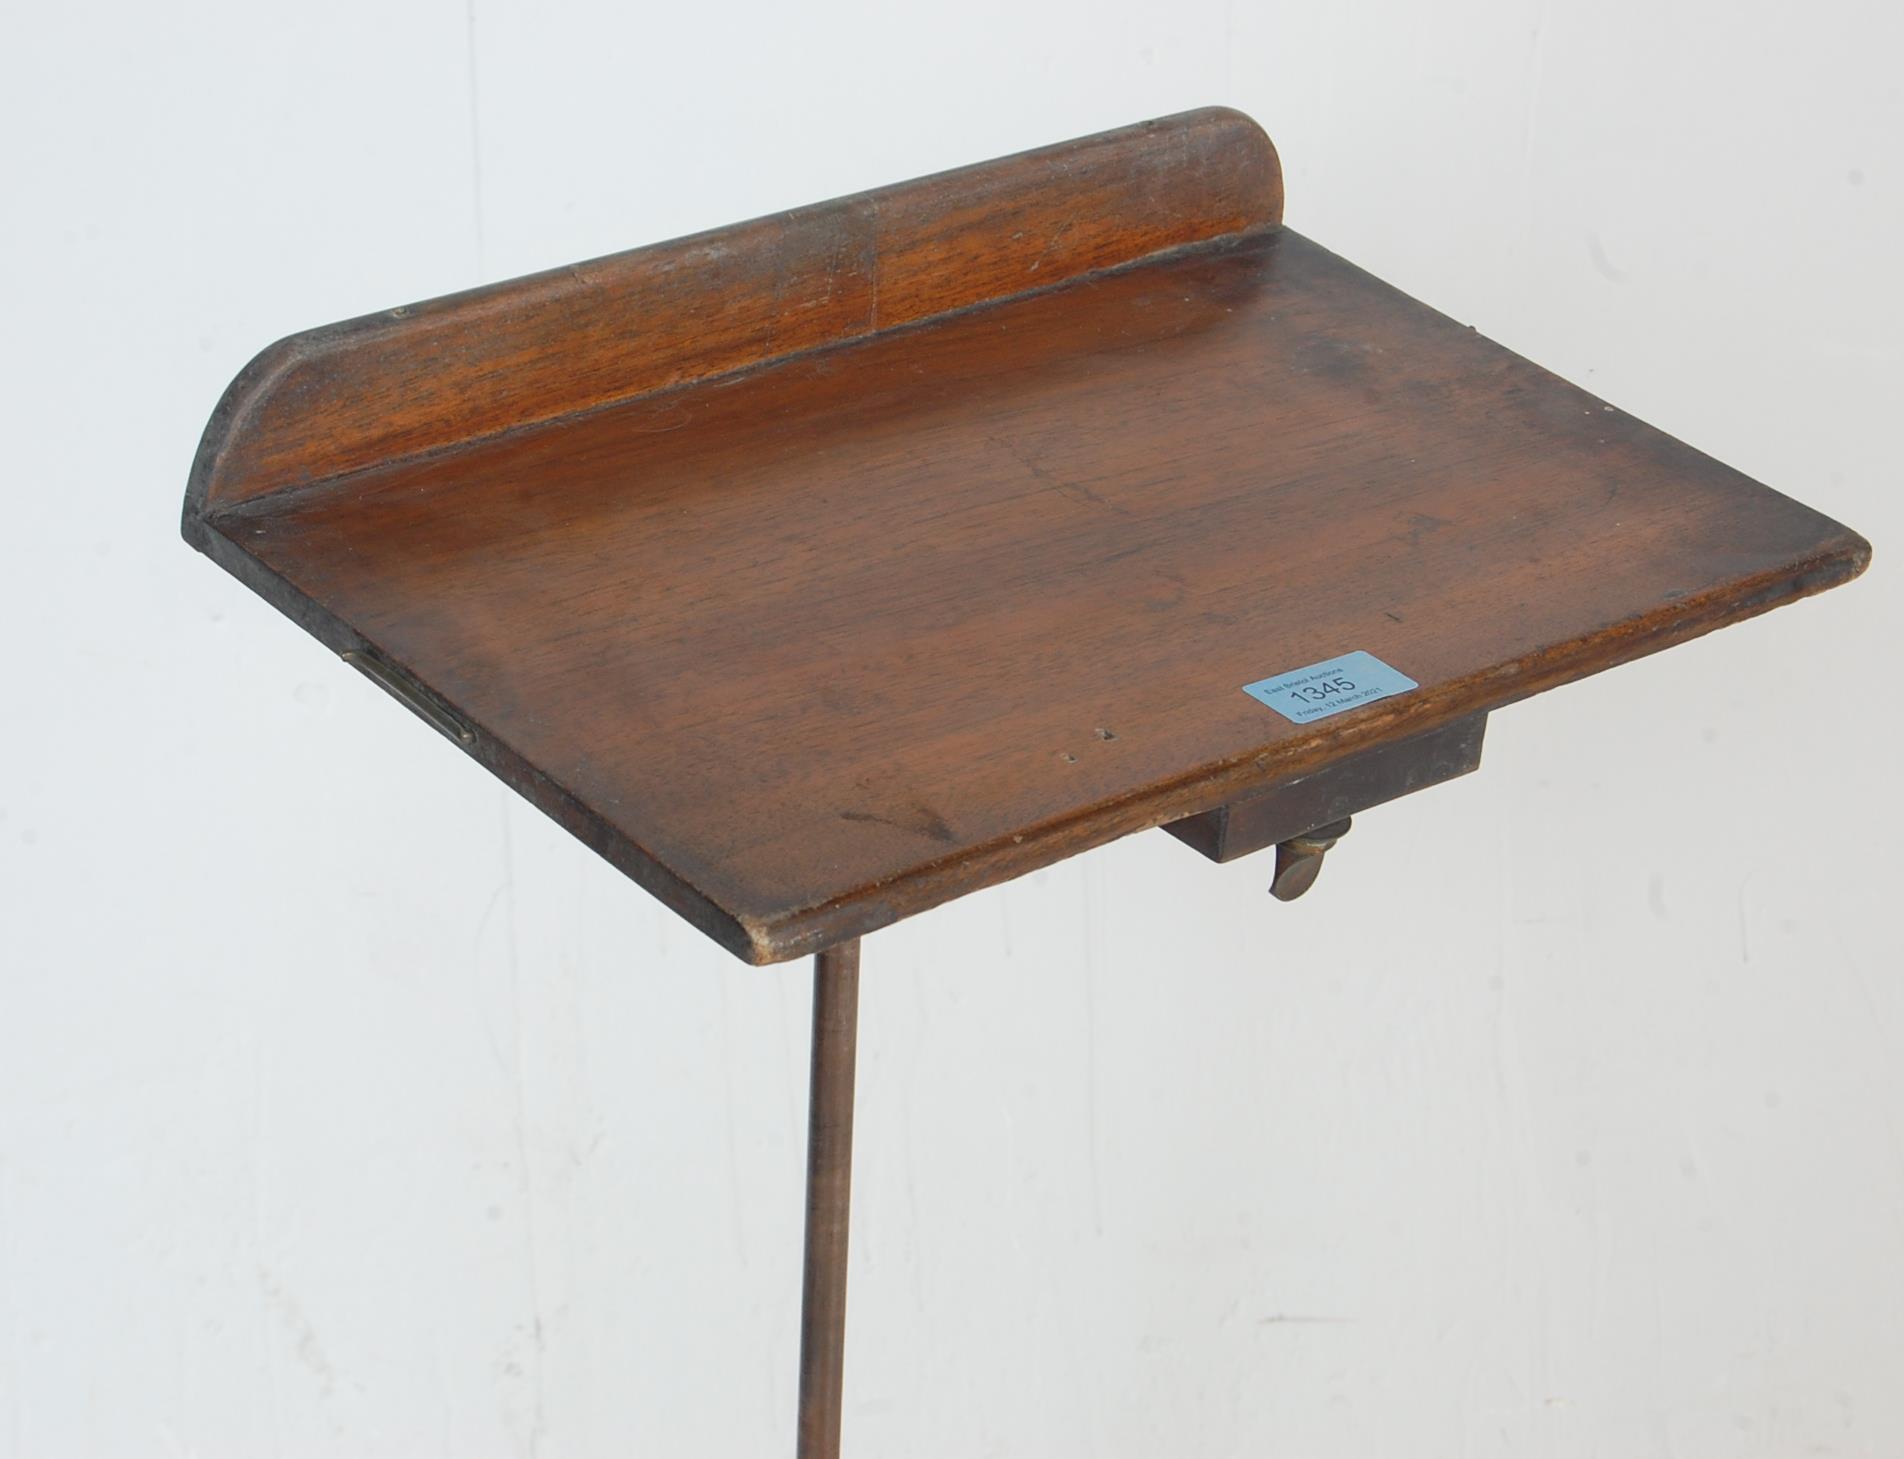 EARLY 20TH CENTURY LITERARY MACHINE ADJUSTABLE READING STAND BY CARTERS - Image 3 of 5